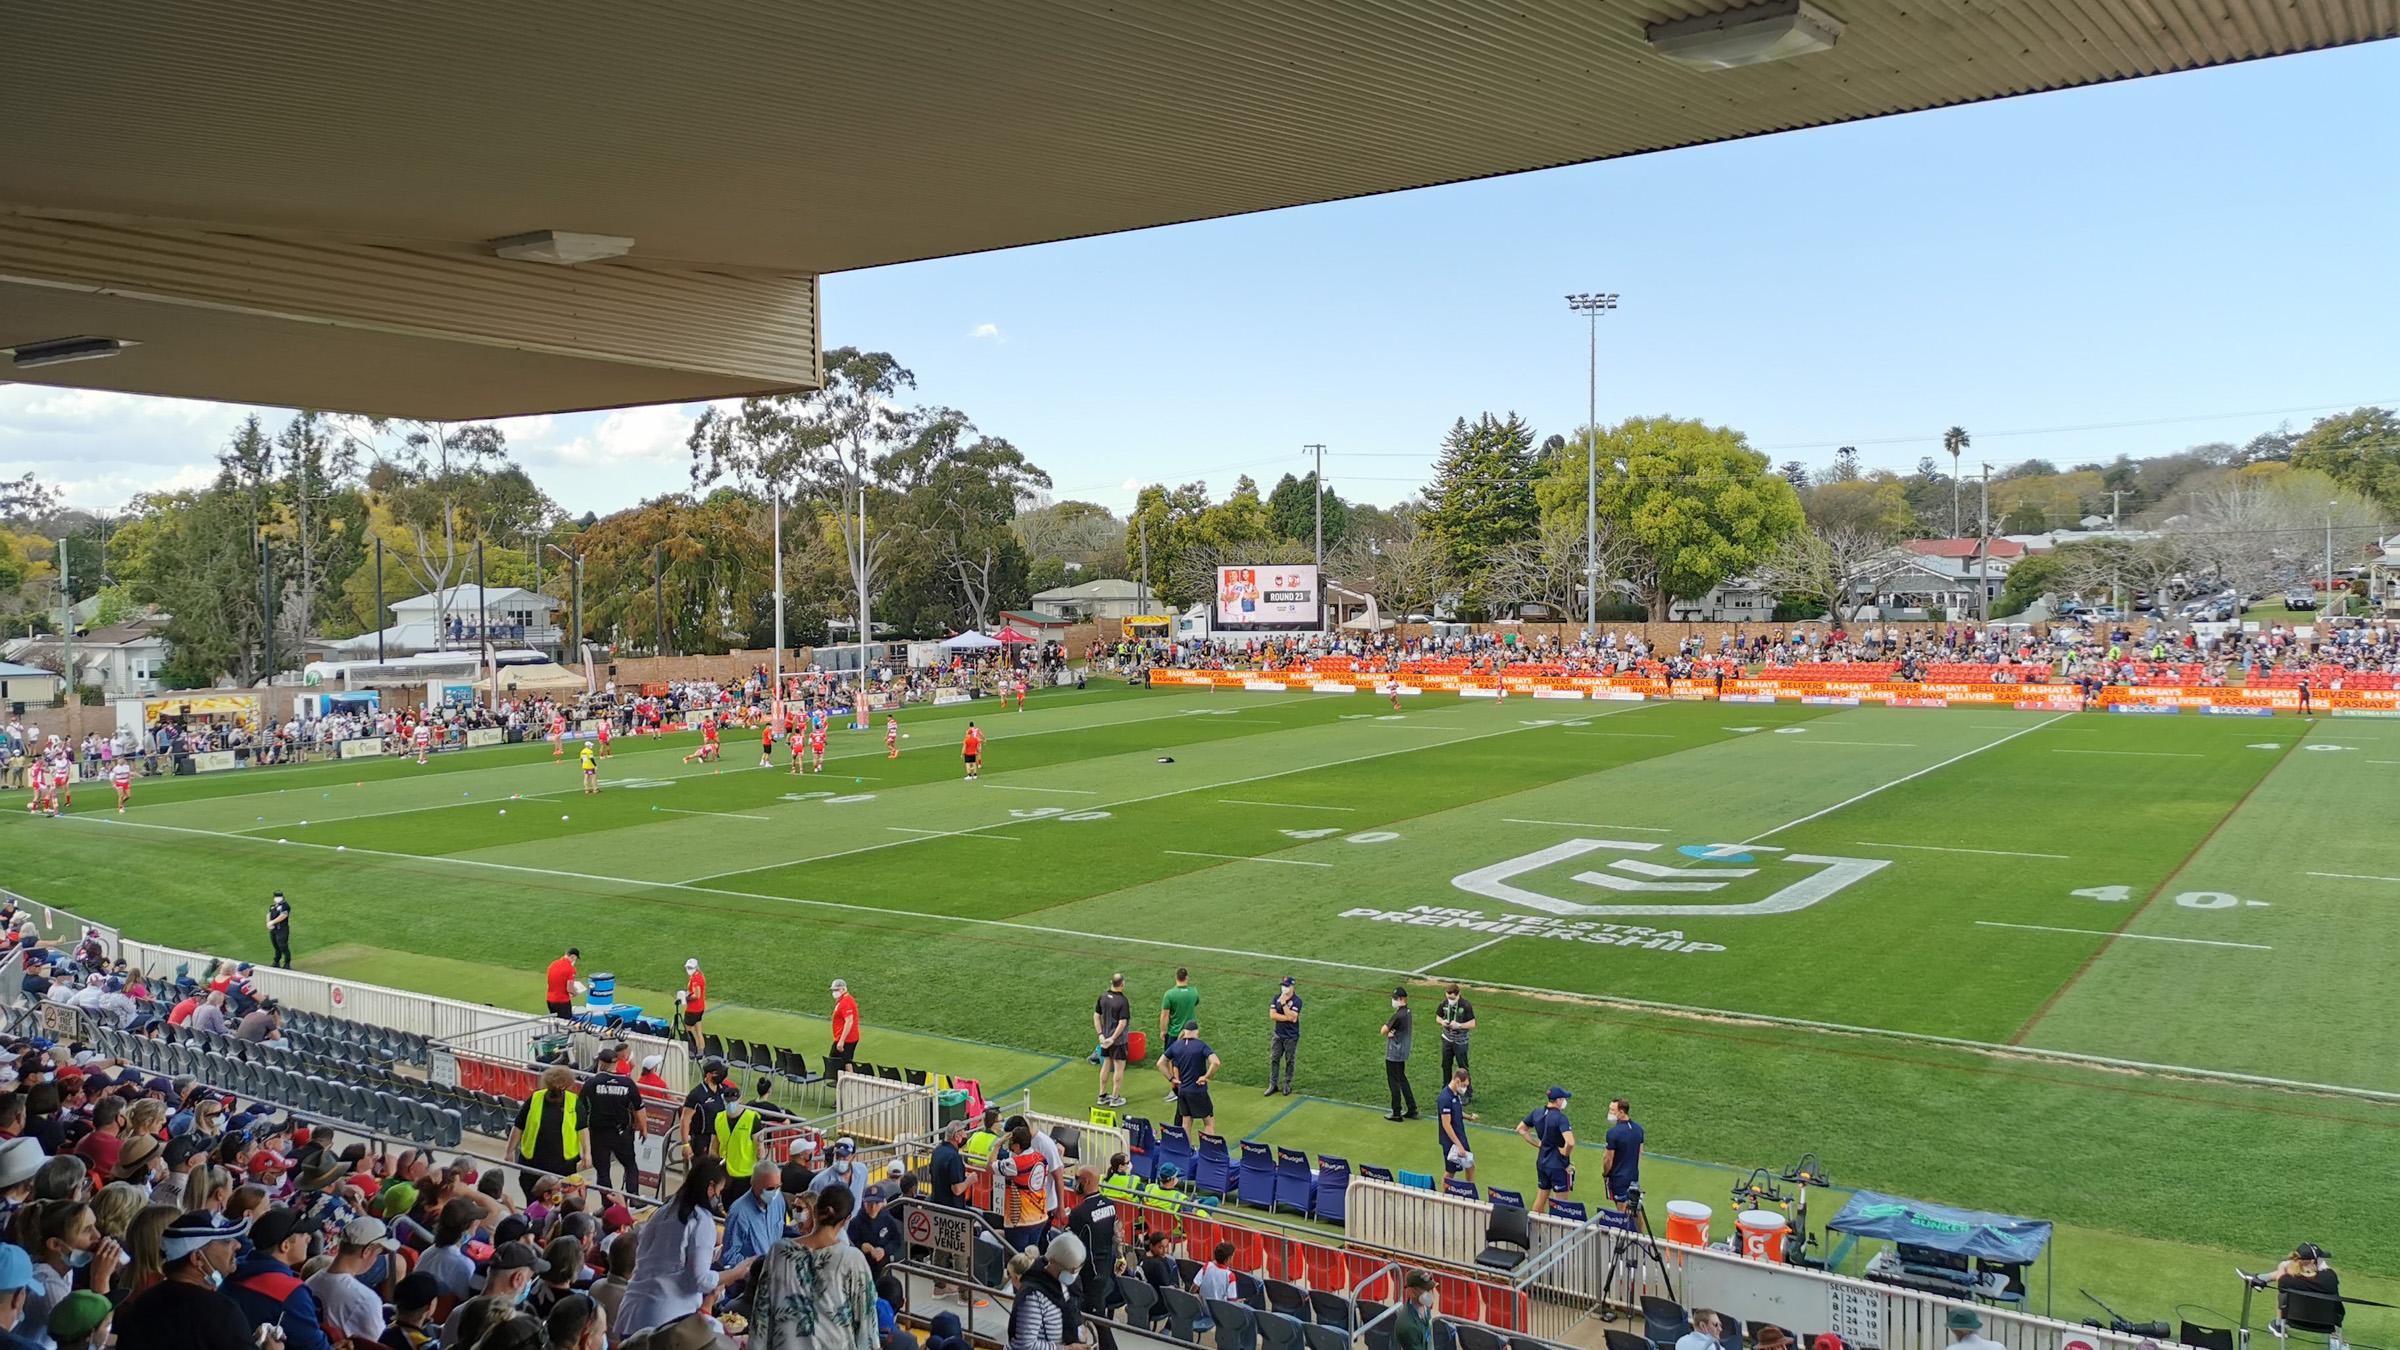 Stadium view of the Toowoomba sports ground, with athletes on the field playing a rugby match